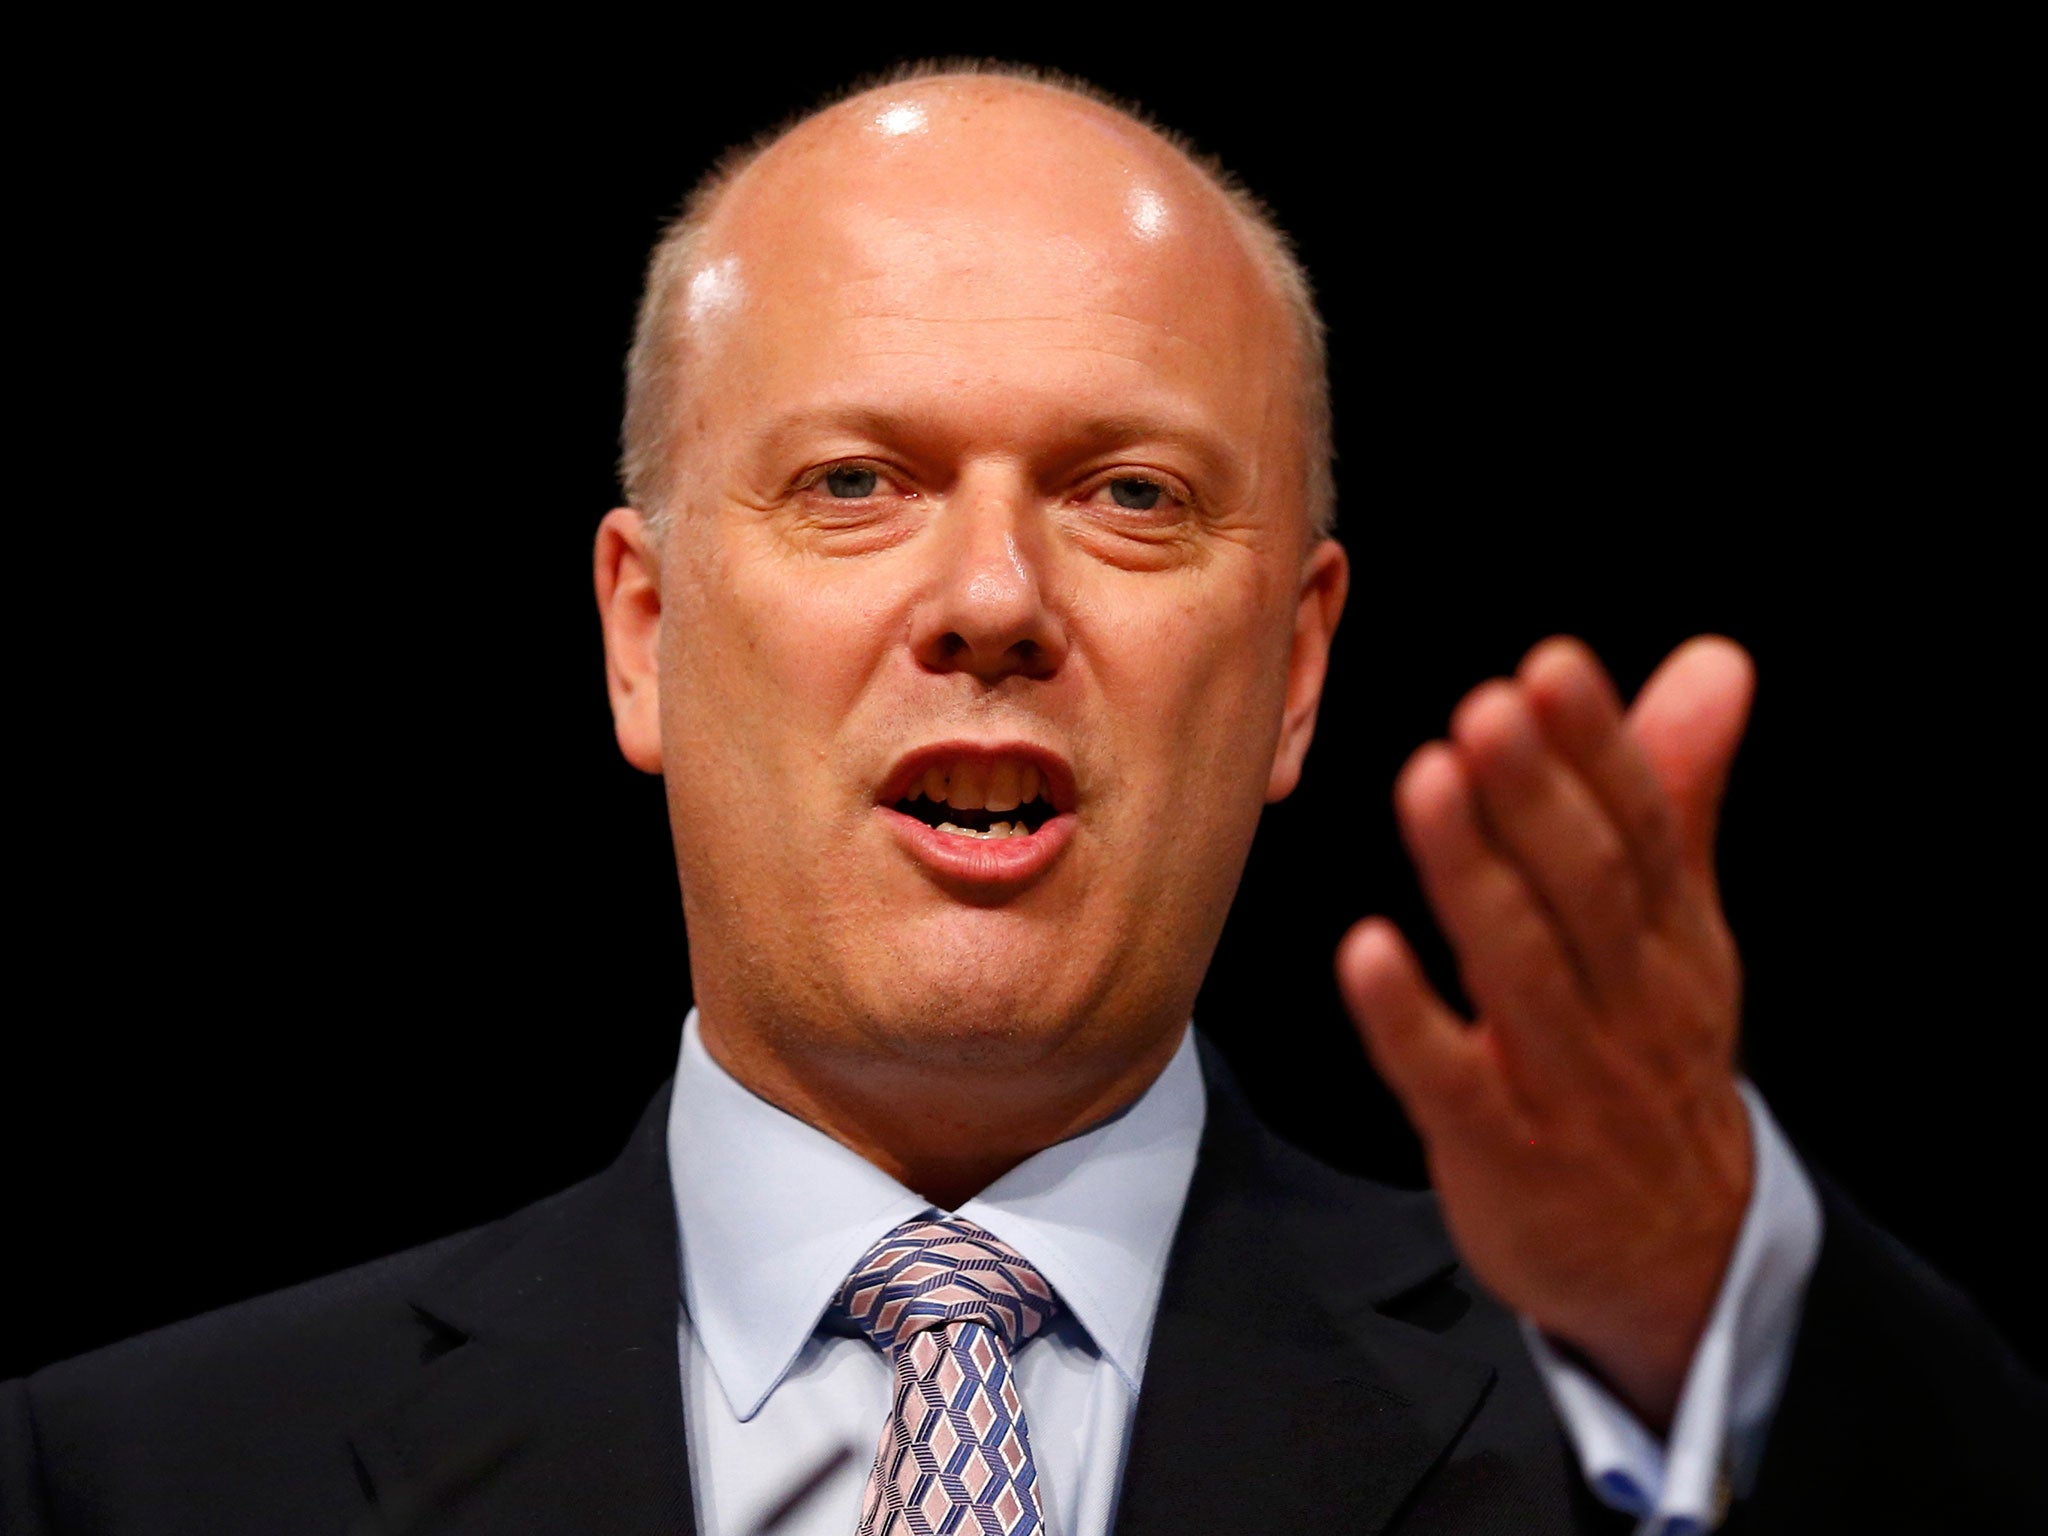 Chris Grayling agreed in return not to campaign for a leave vote until after the renegotiation